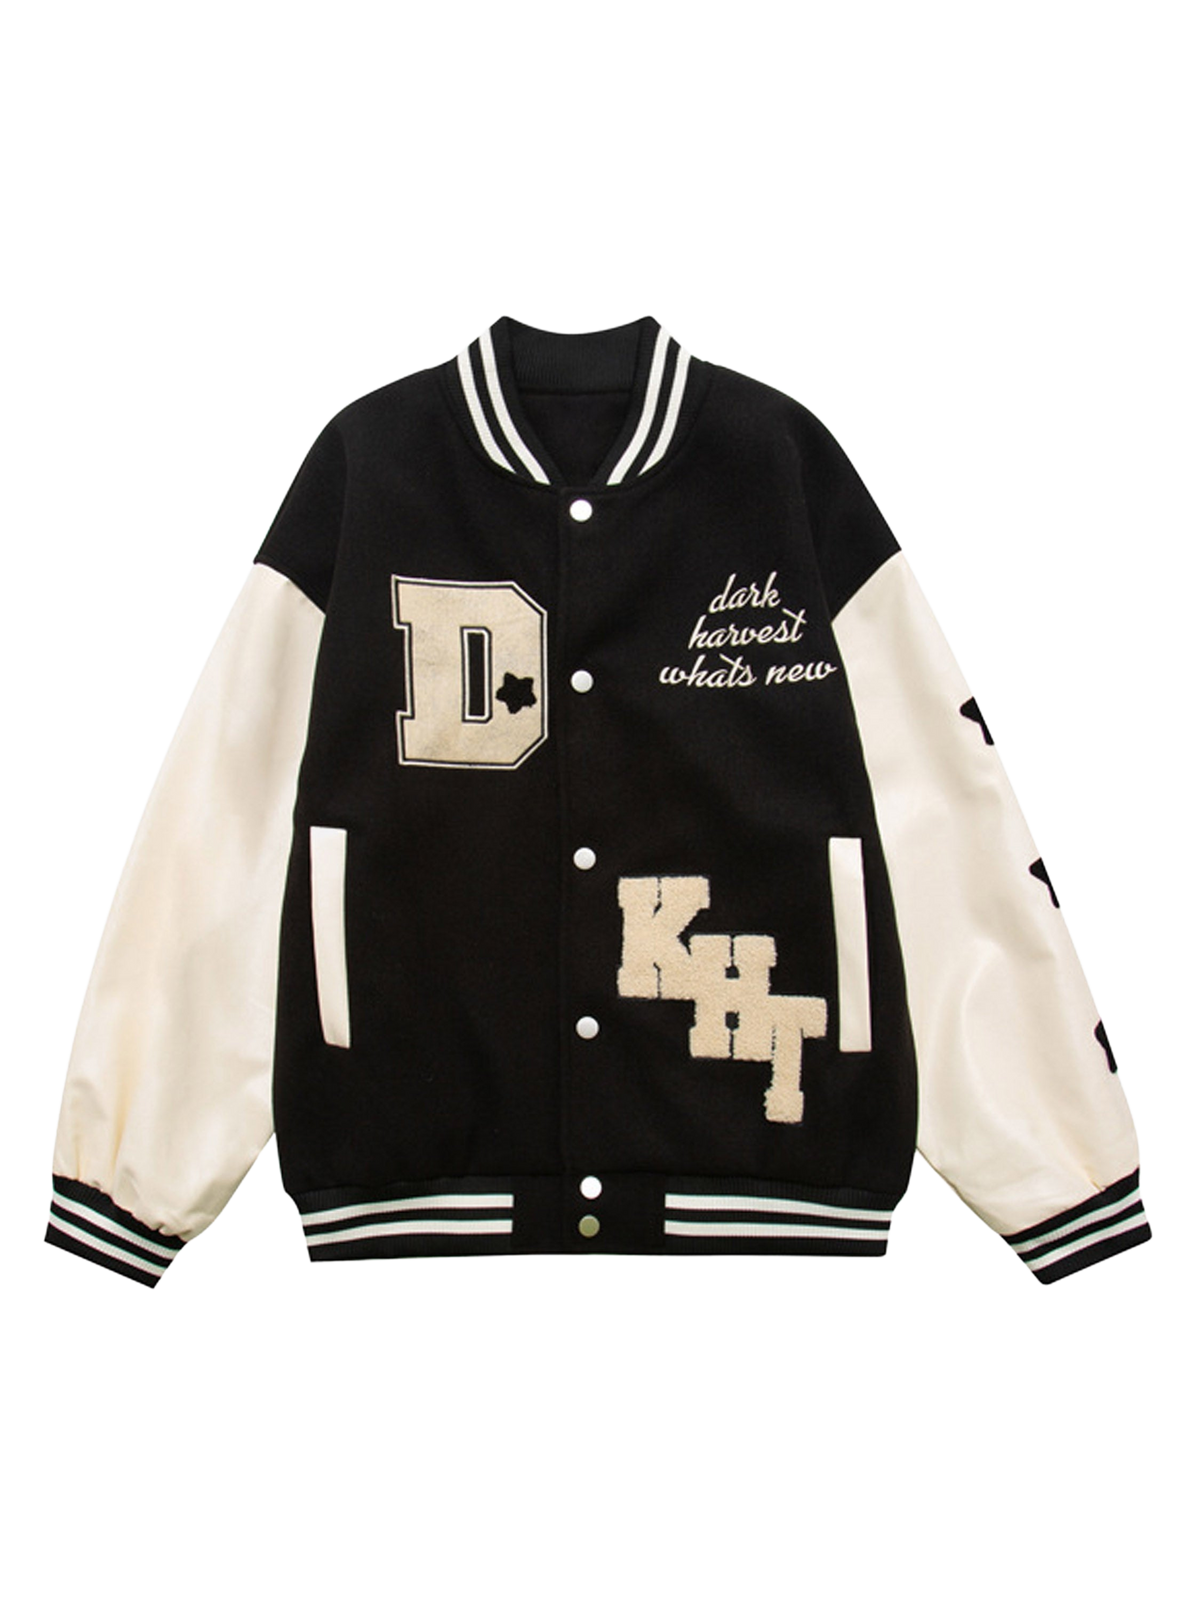 LUXENFY™ - American High Street Letters Clash Color Baseball Jacket luxenfy.com